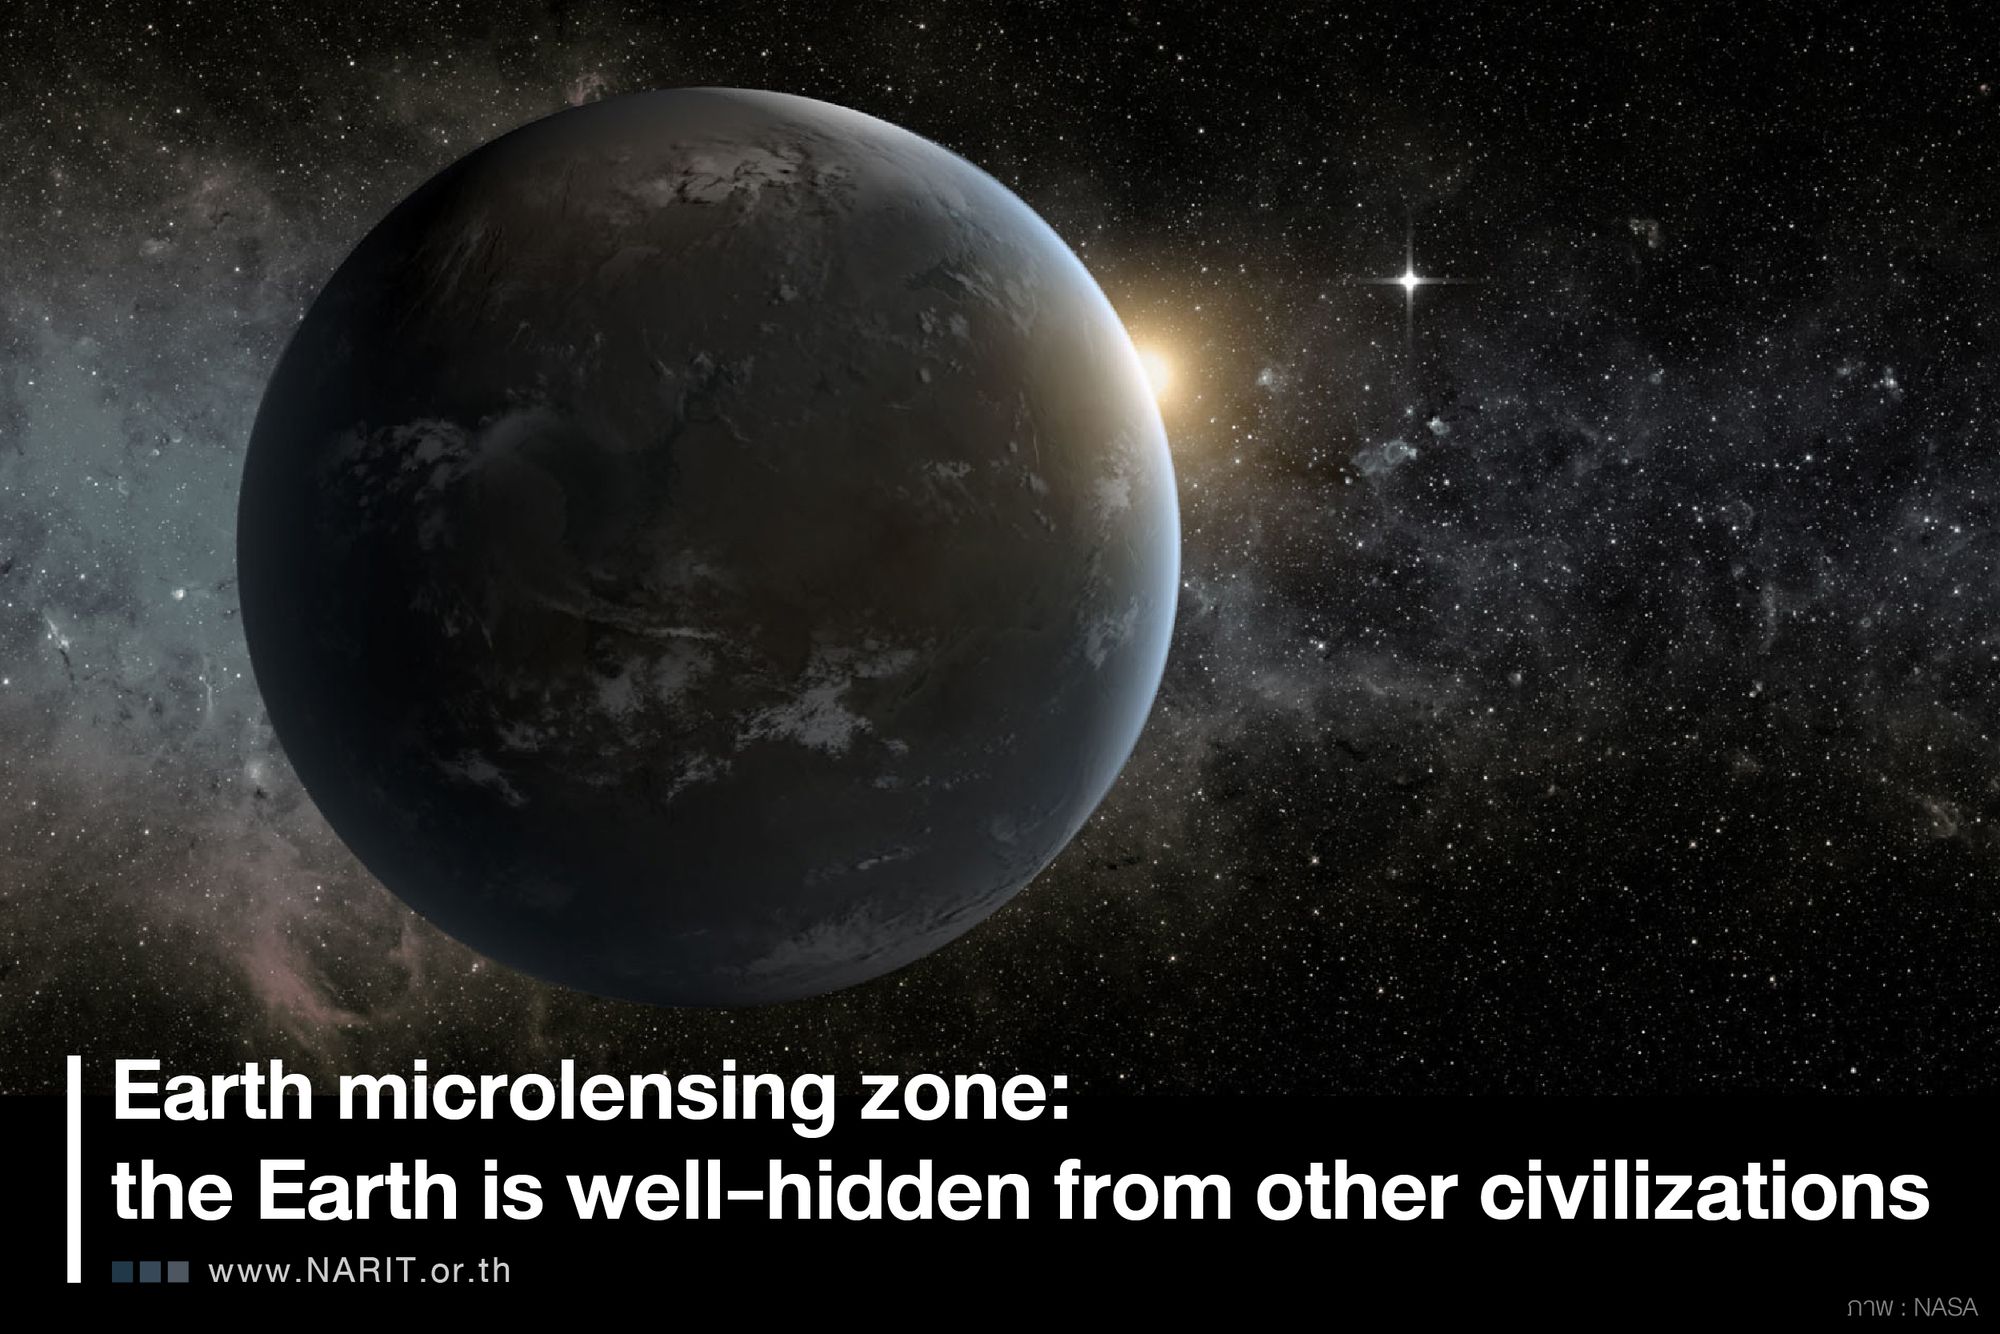 Earth microlensing zone: the Earth is well-hidden from other civilizations